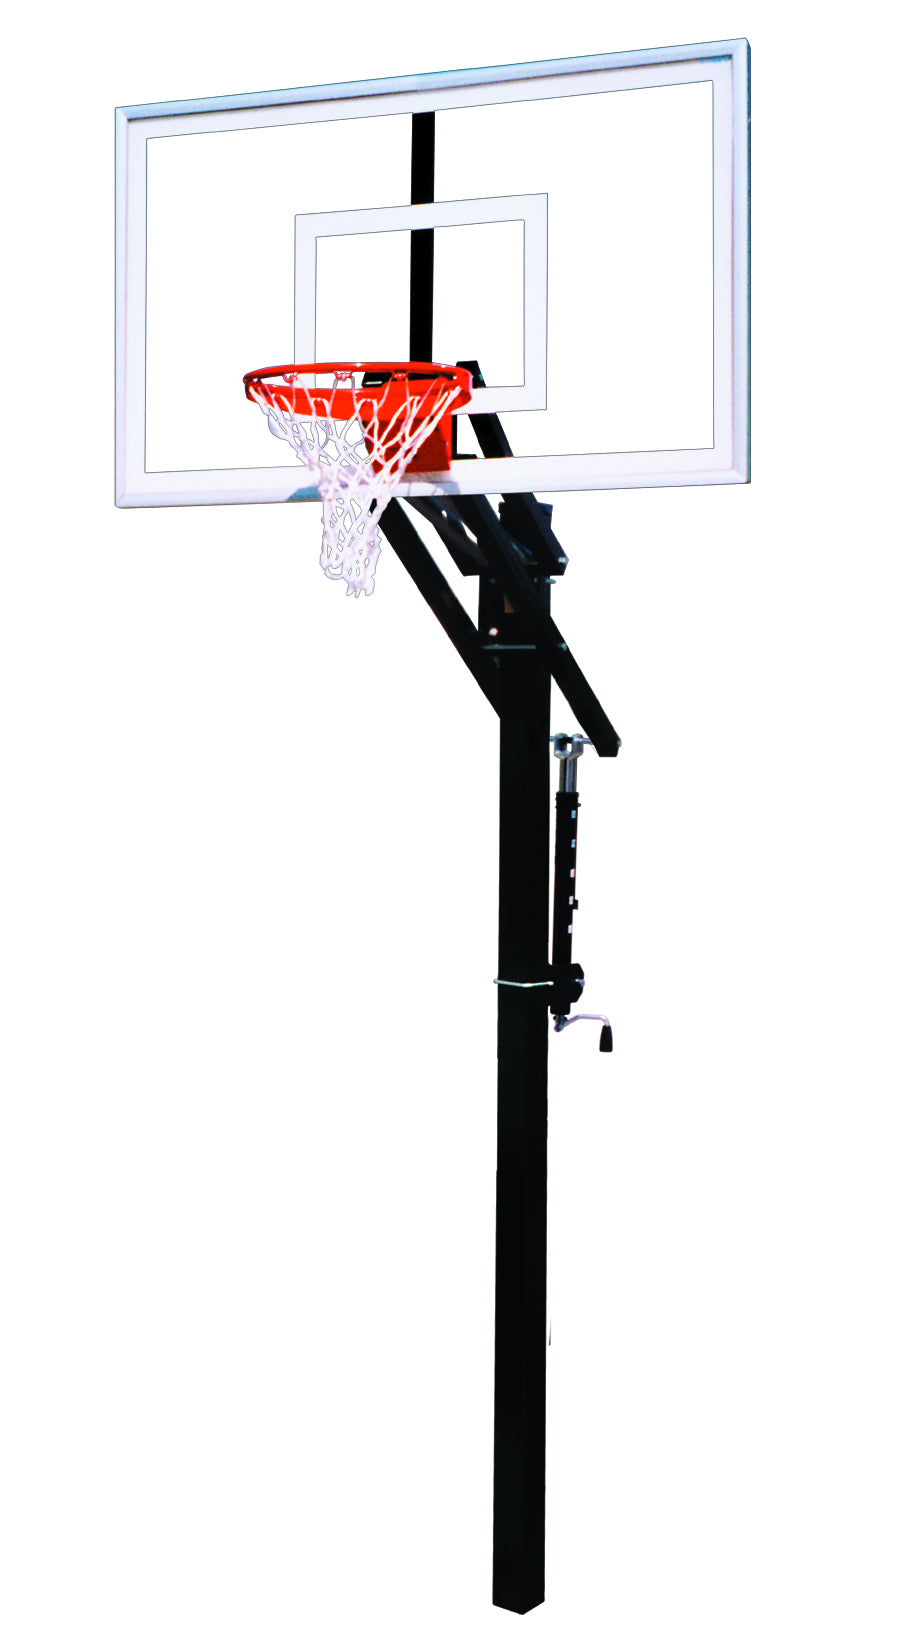 First Team Jam Nitro In Ground Basketball Goal - 36"x60" Tempered Glass